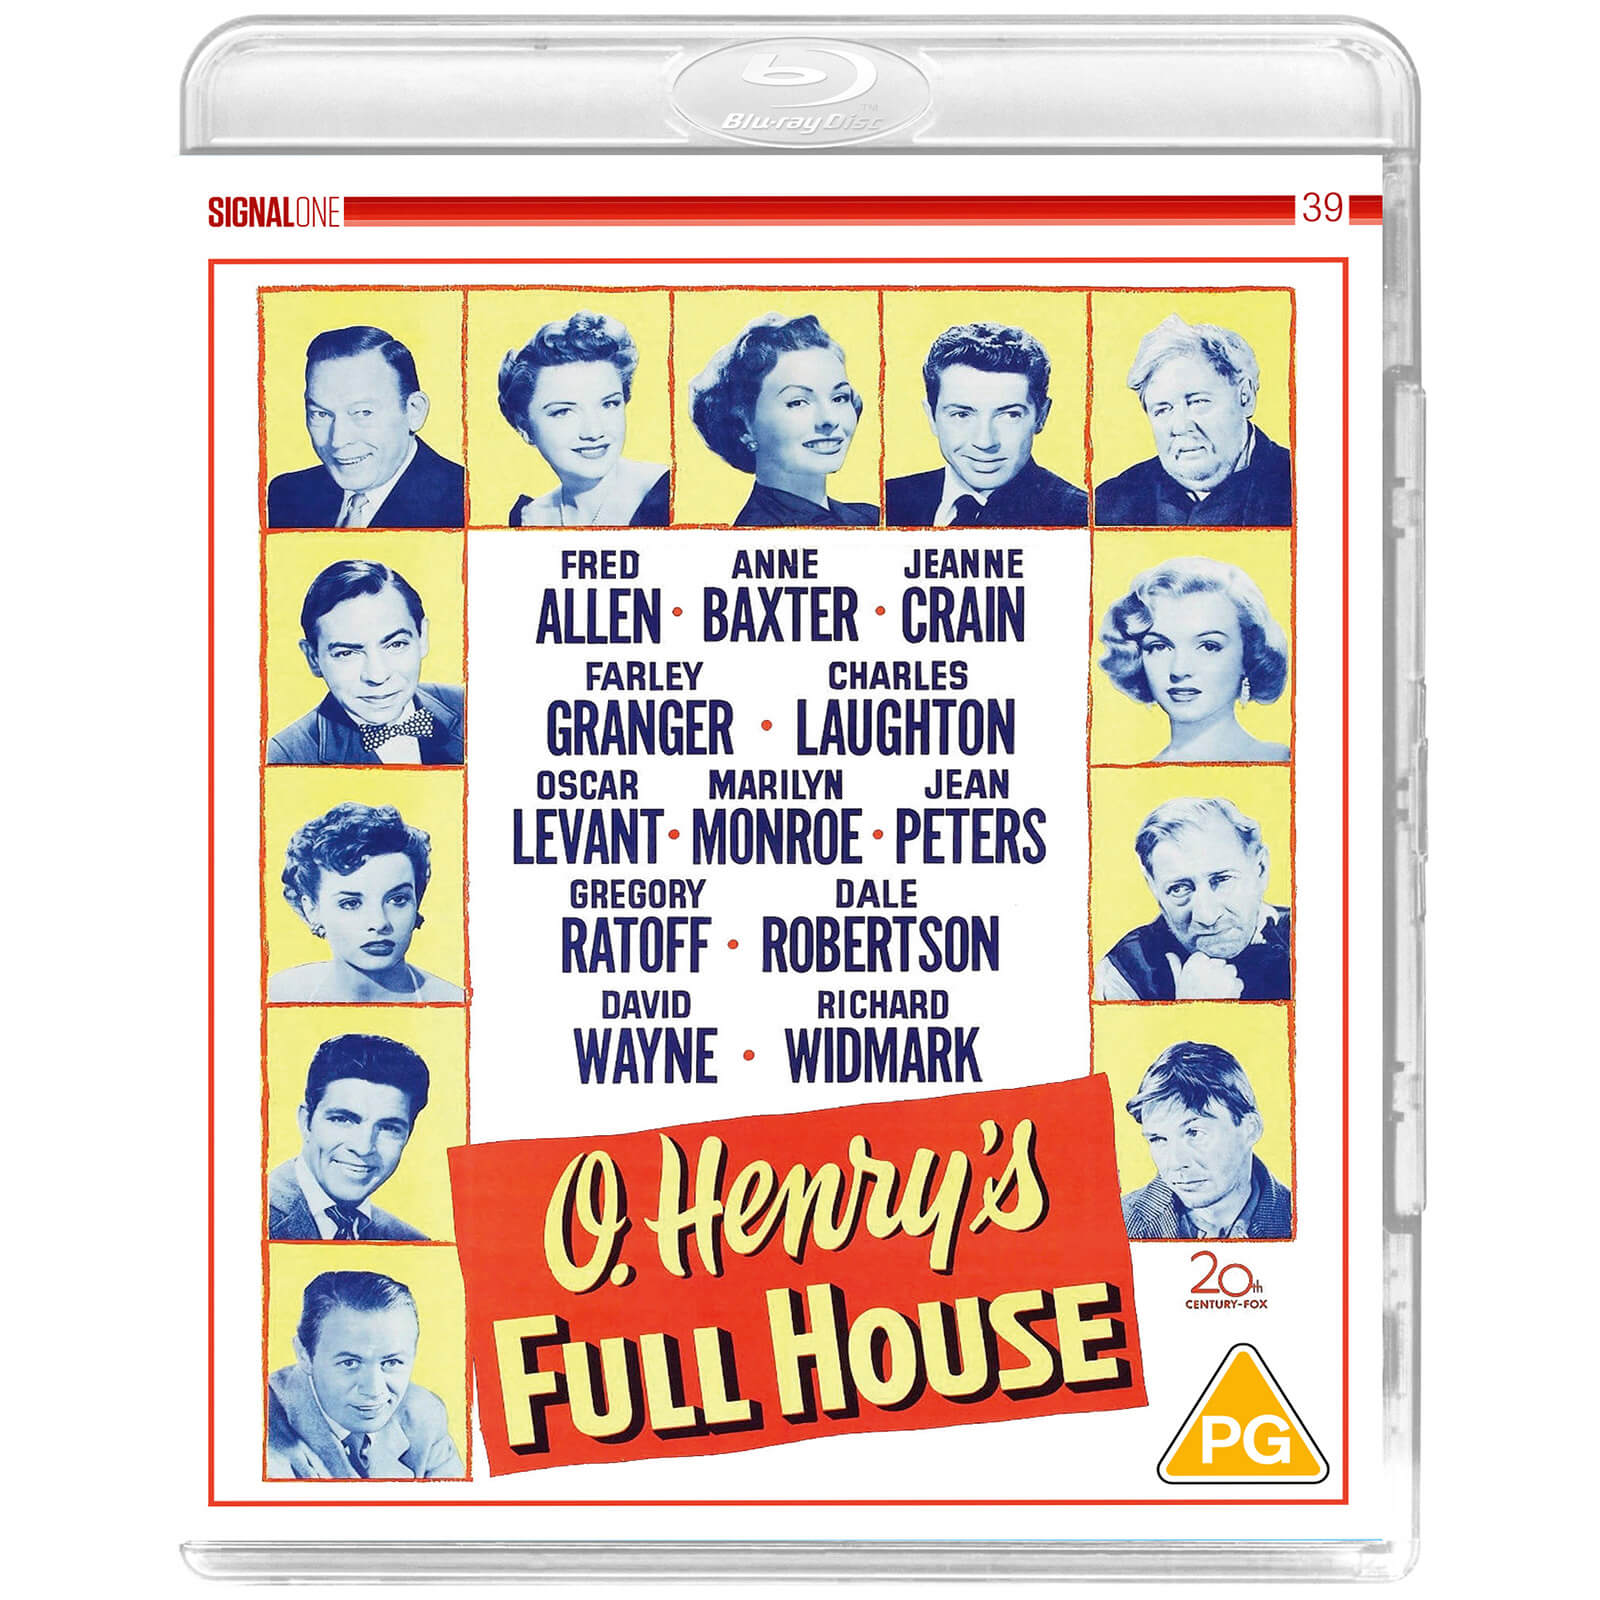 O. Henry's Full House - Dual Format Edition von Signal One Entertainment